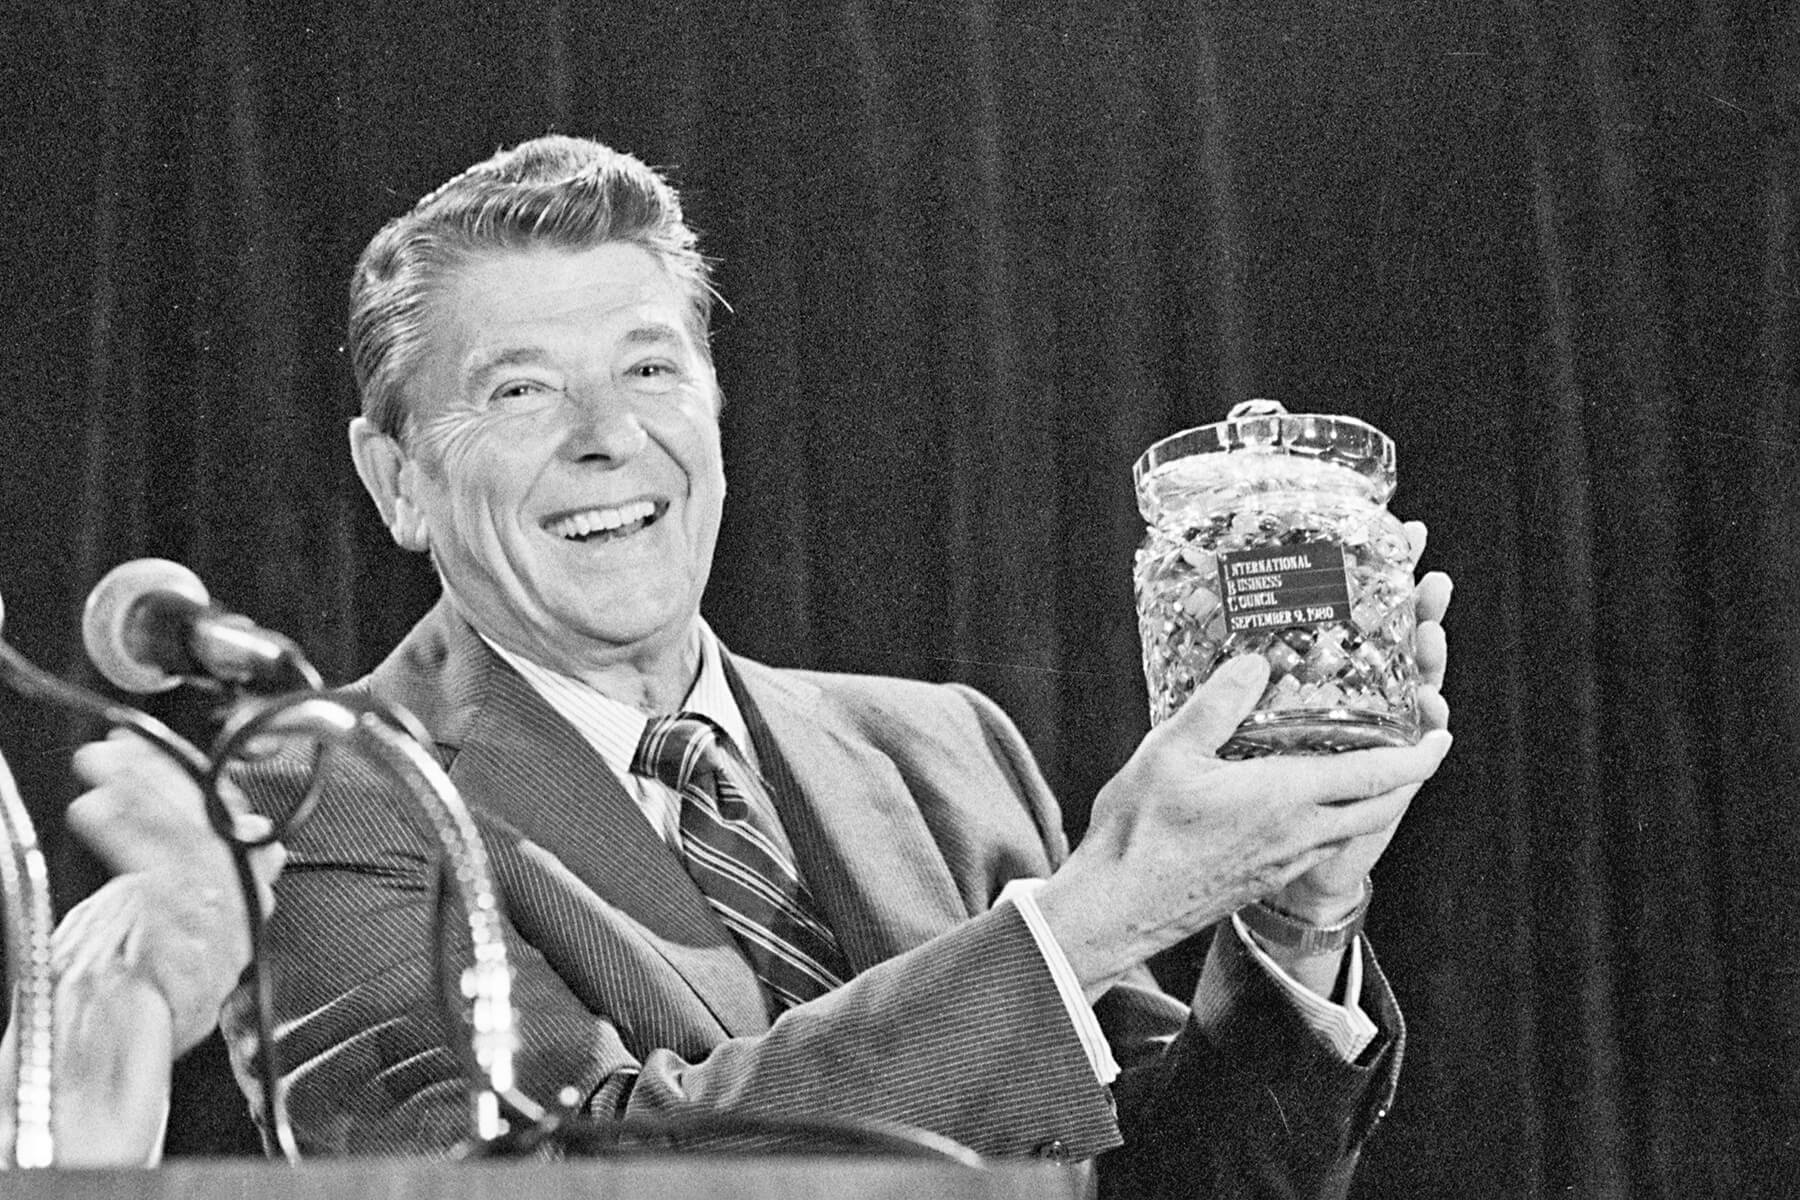 Ronald Reagan with jelly beans